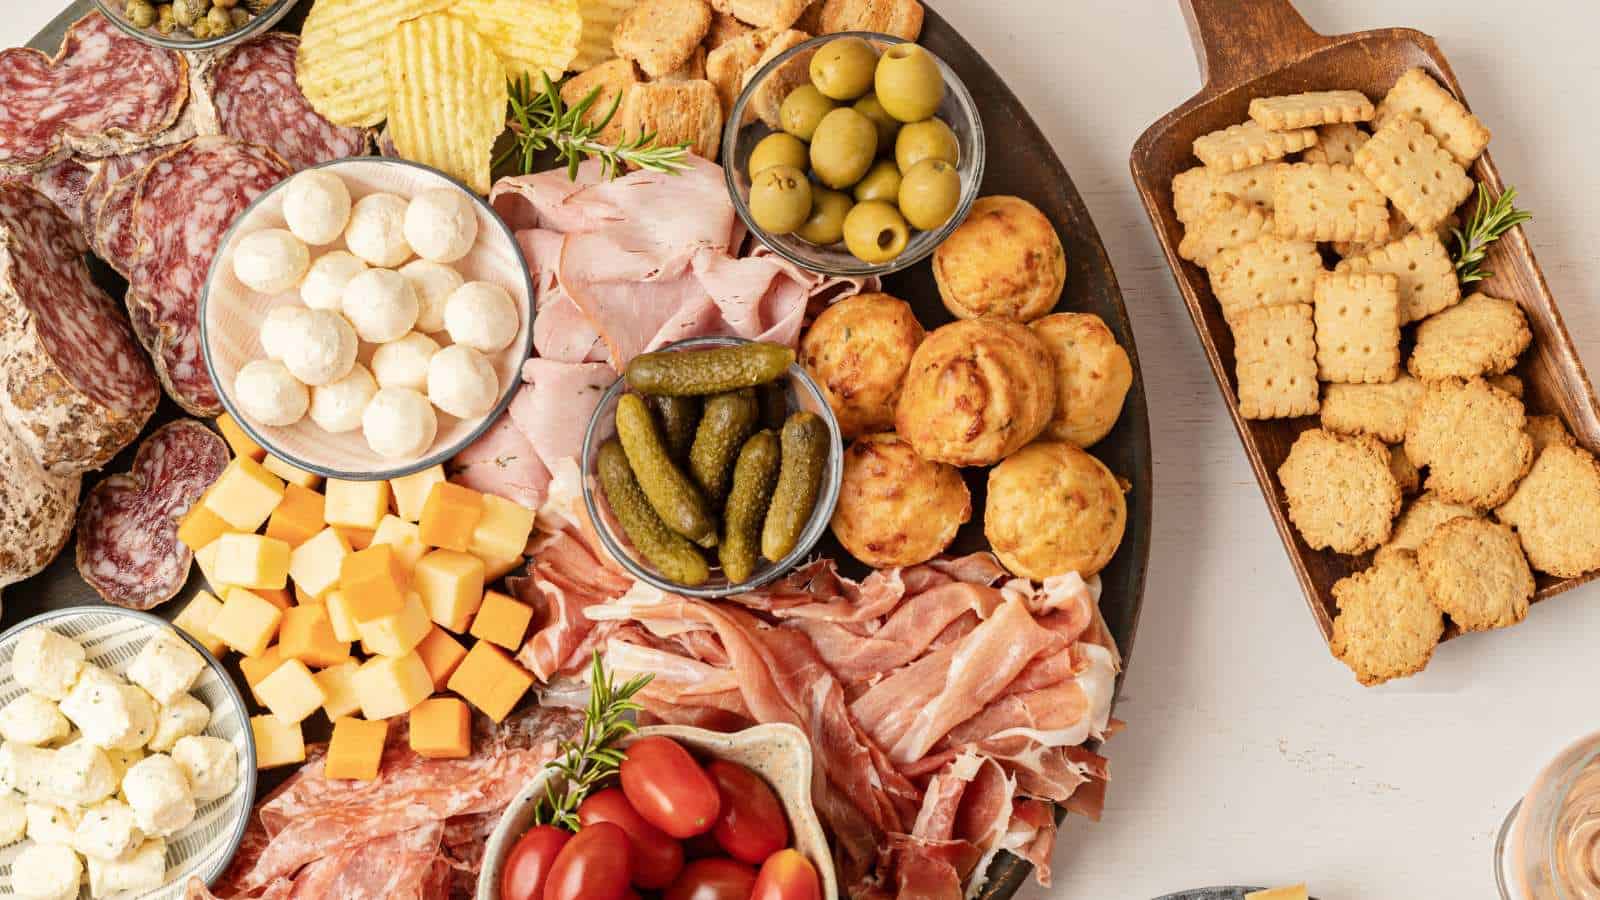 A platter of meats, cheeses and crackers on a table.